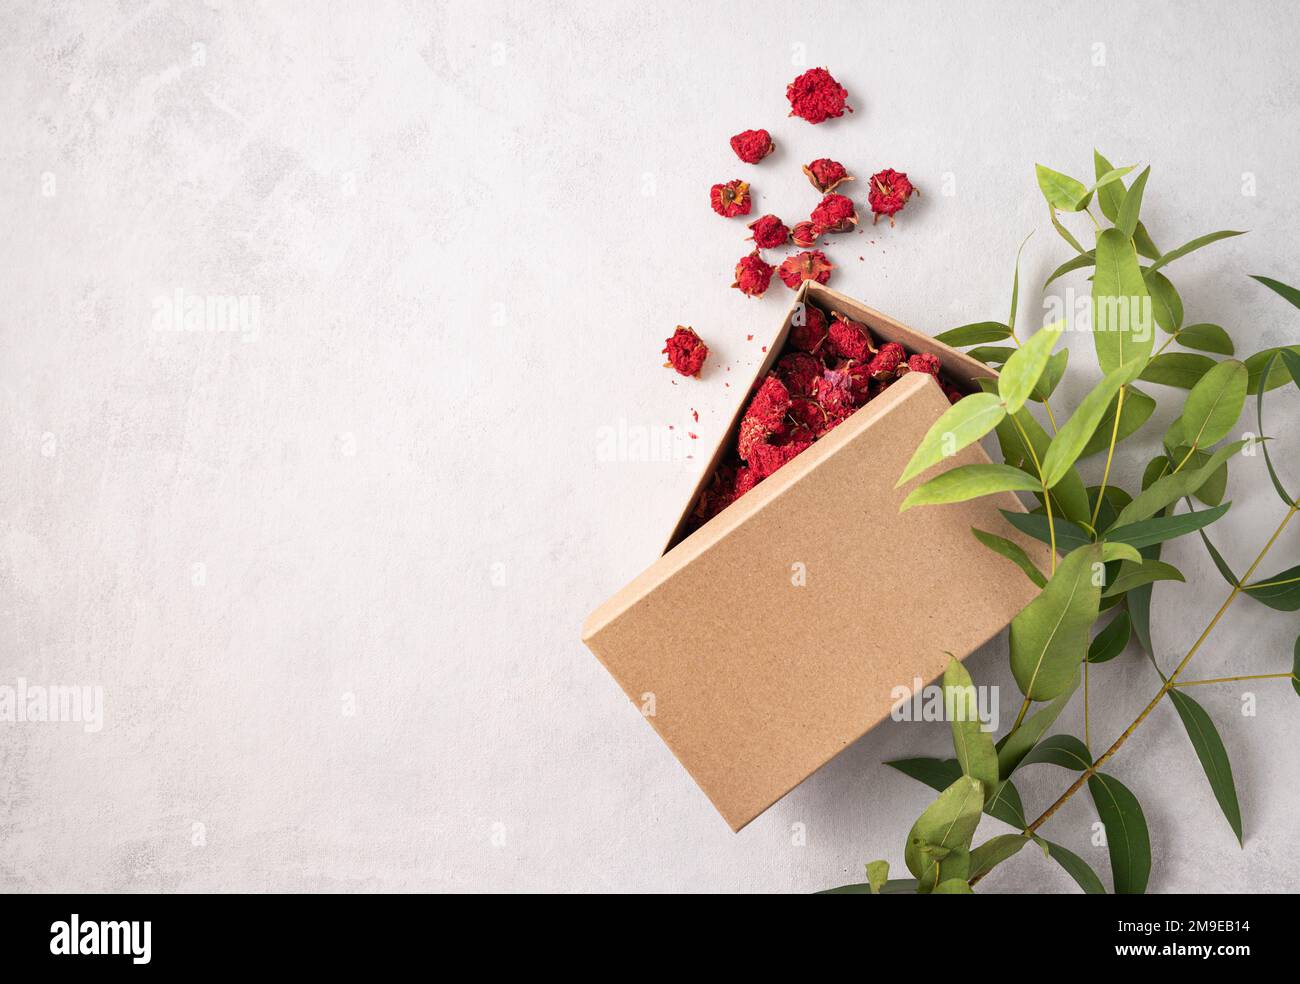 Craft box with red dry flowers on a gray textured background with branch plant. The concept of ecological packaging and zero waste. Mock up, copy spac Stock Photo